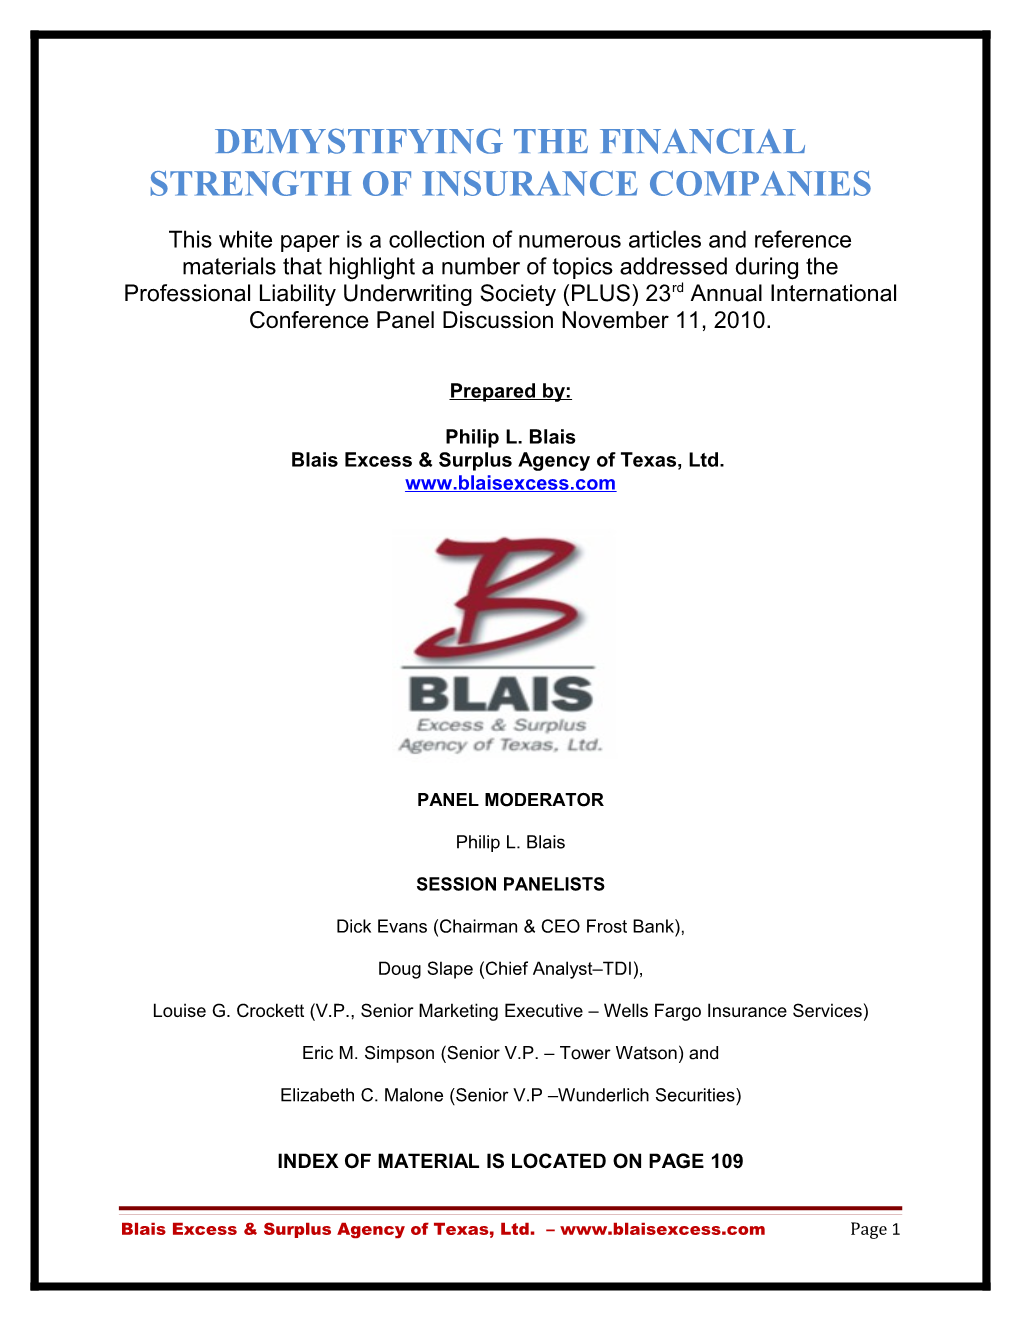 Demystifying the Financial Strength of Insurance Companies